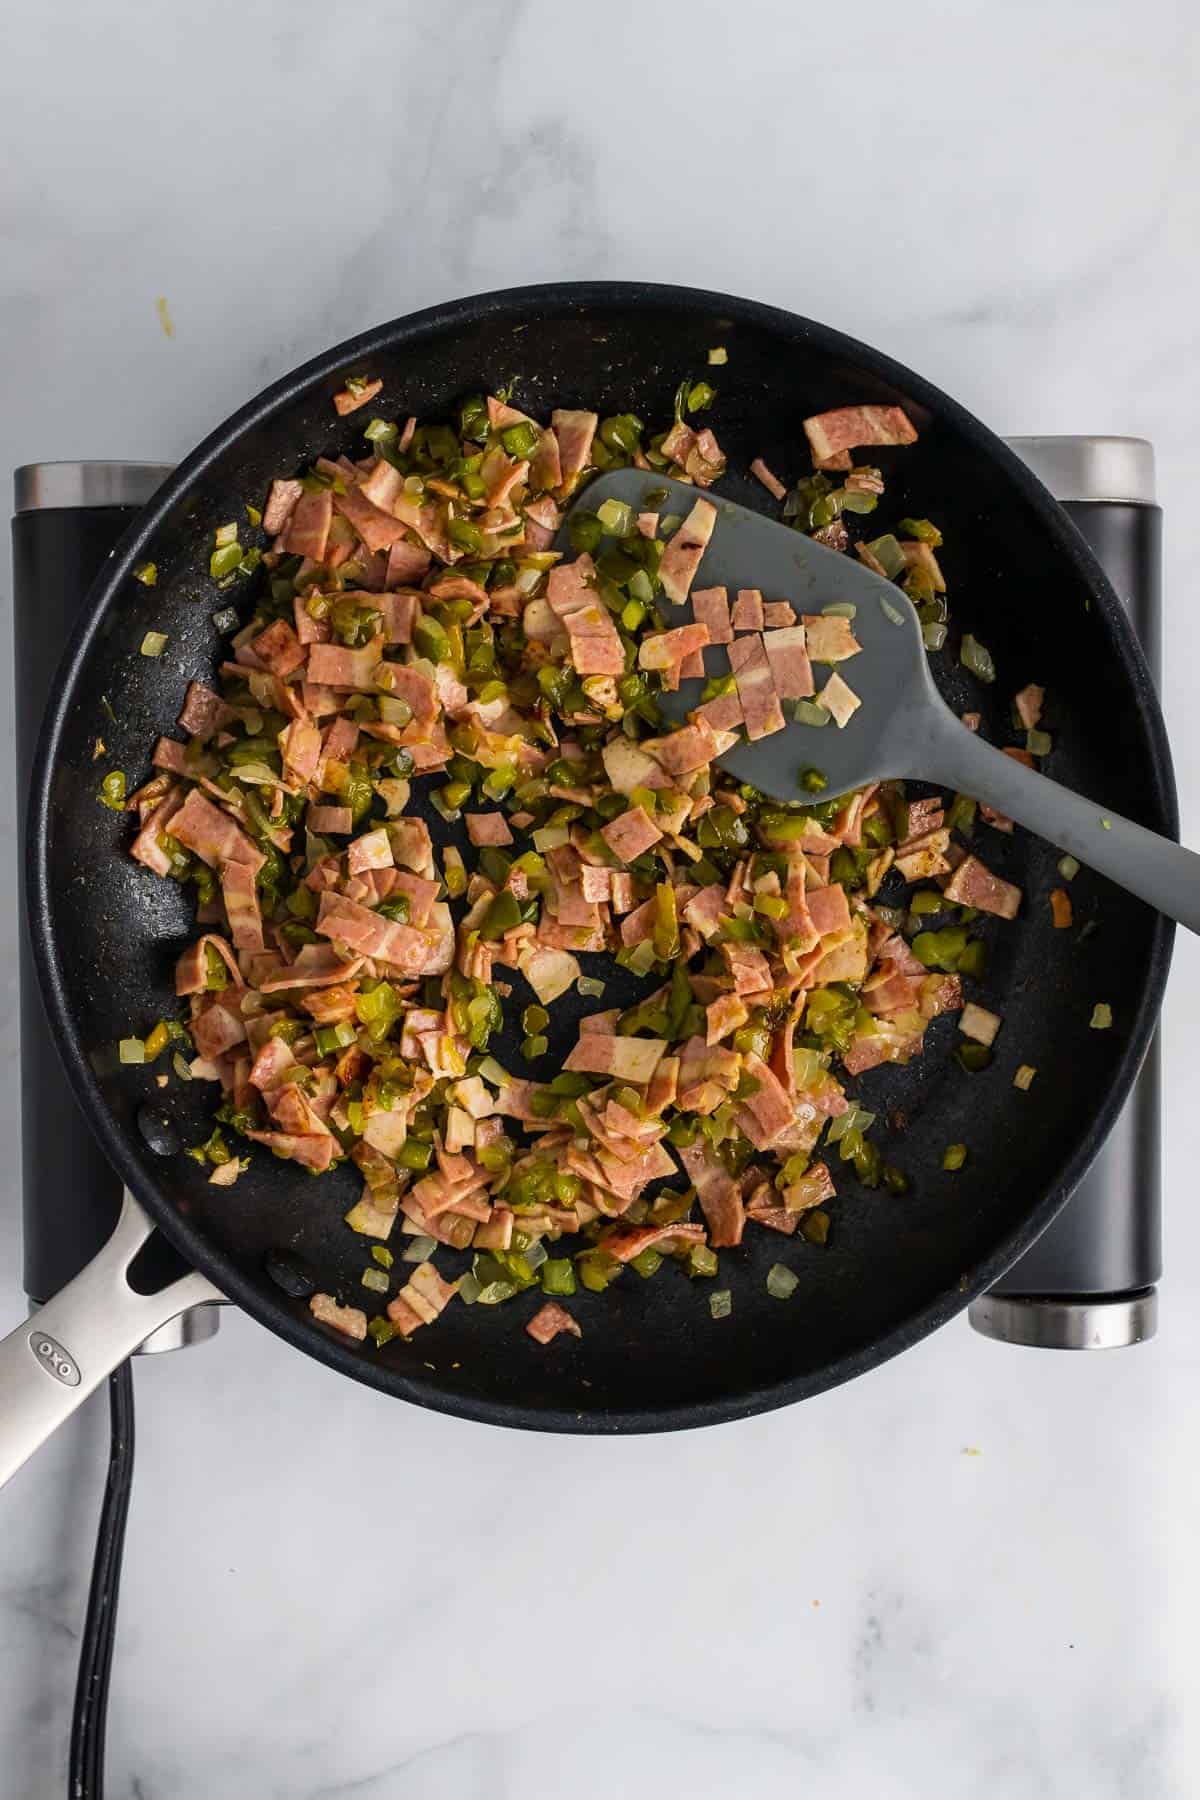 Cooked bacon and veggies in a pan